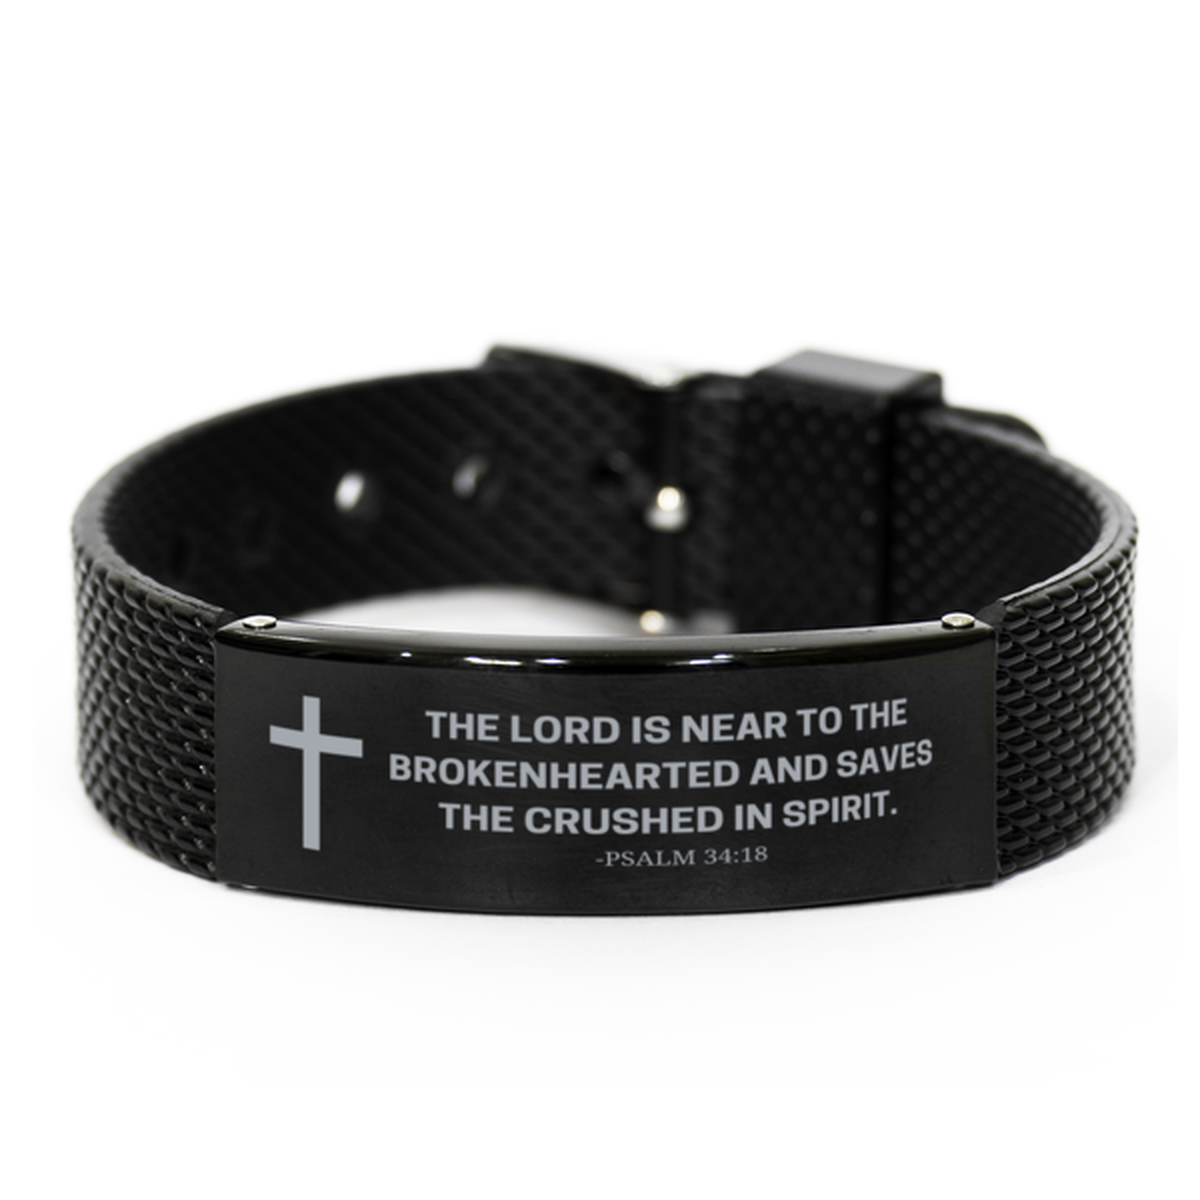 Baptism Gifts For Teenage Boys Girls, Christian Bible Verse Black Shark Mesh Bracelet, The Lord is near to the brokenhearted, Catholic Confirmation Gifts for Son, Godson, Grandson, Nephew